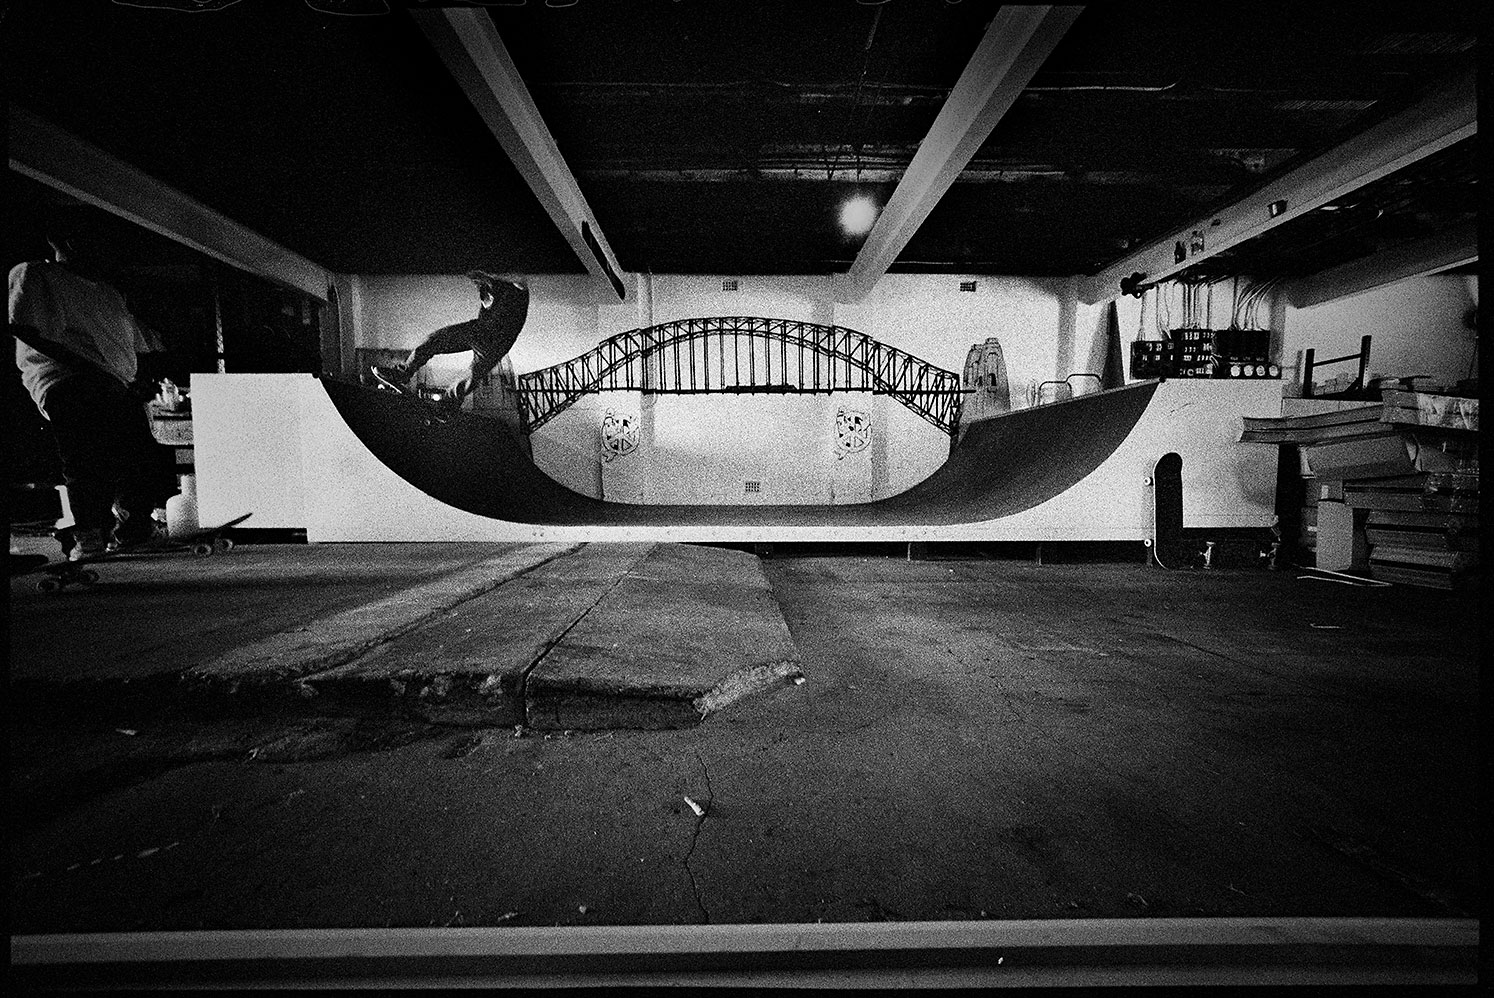 Nathan Ho, Frontside Disaster, Funeral Parlour Ramp, Dulwich Hill, NSW, Silver Gelatin Print, 50.8cm x 60.1cm, 1/5